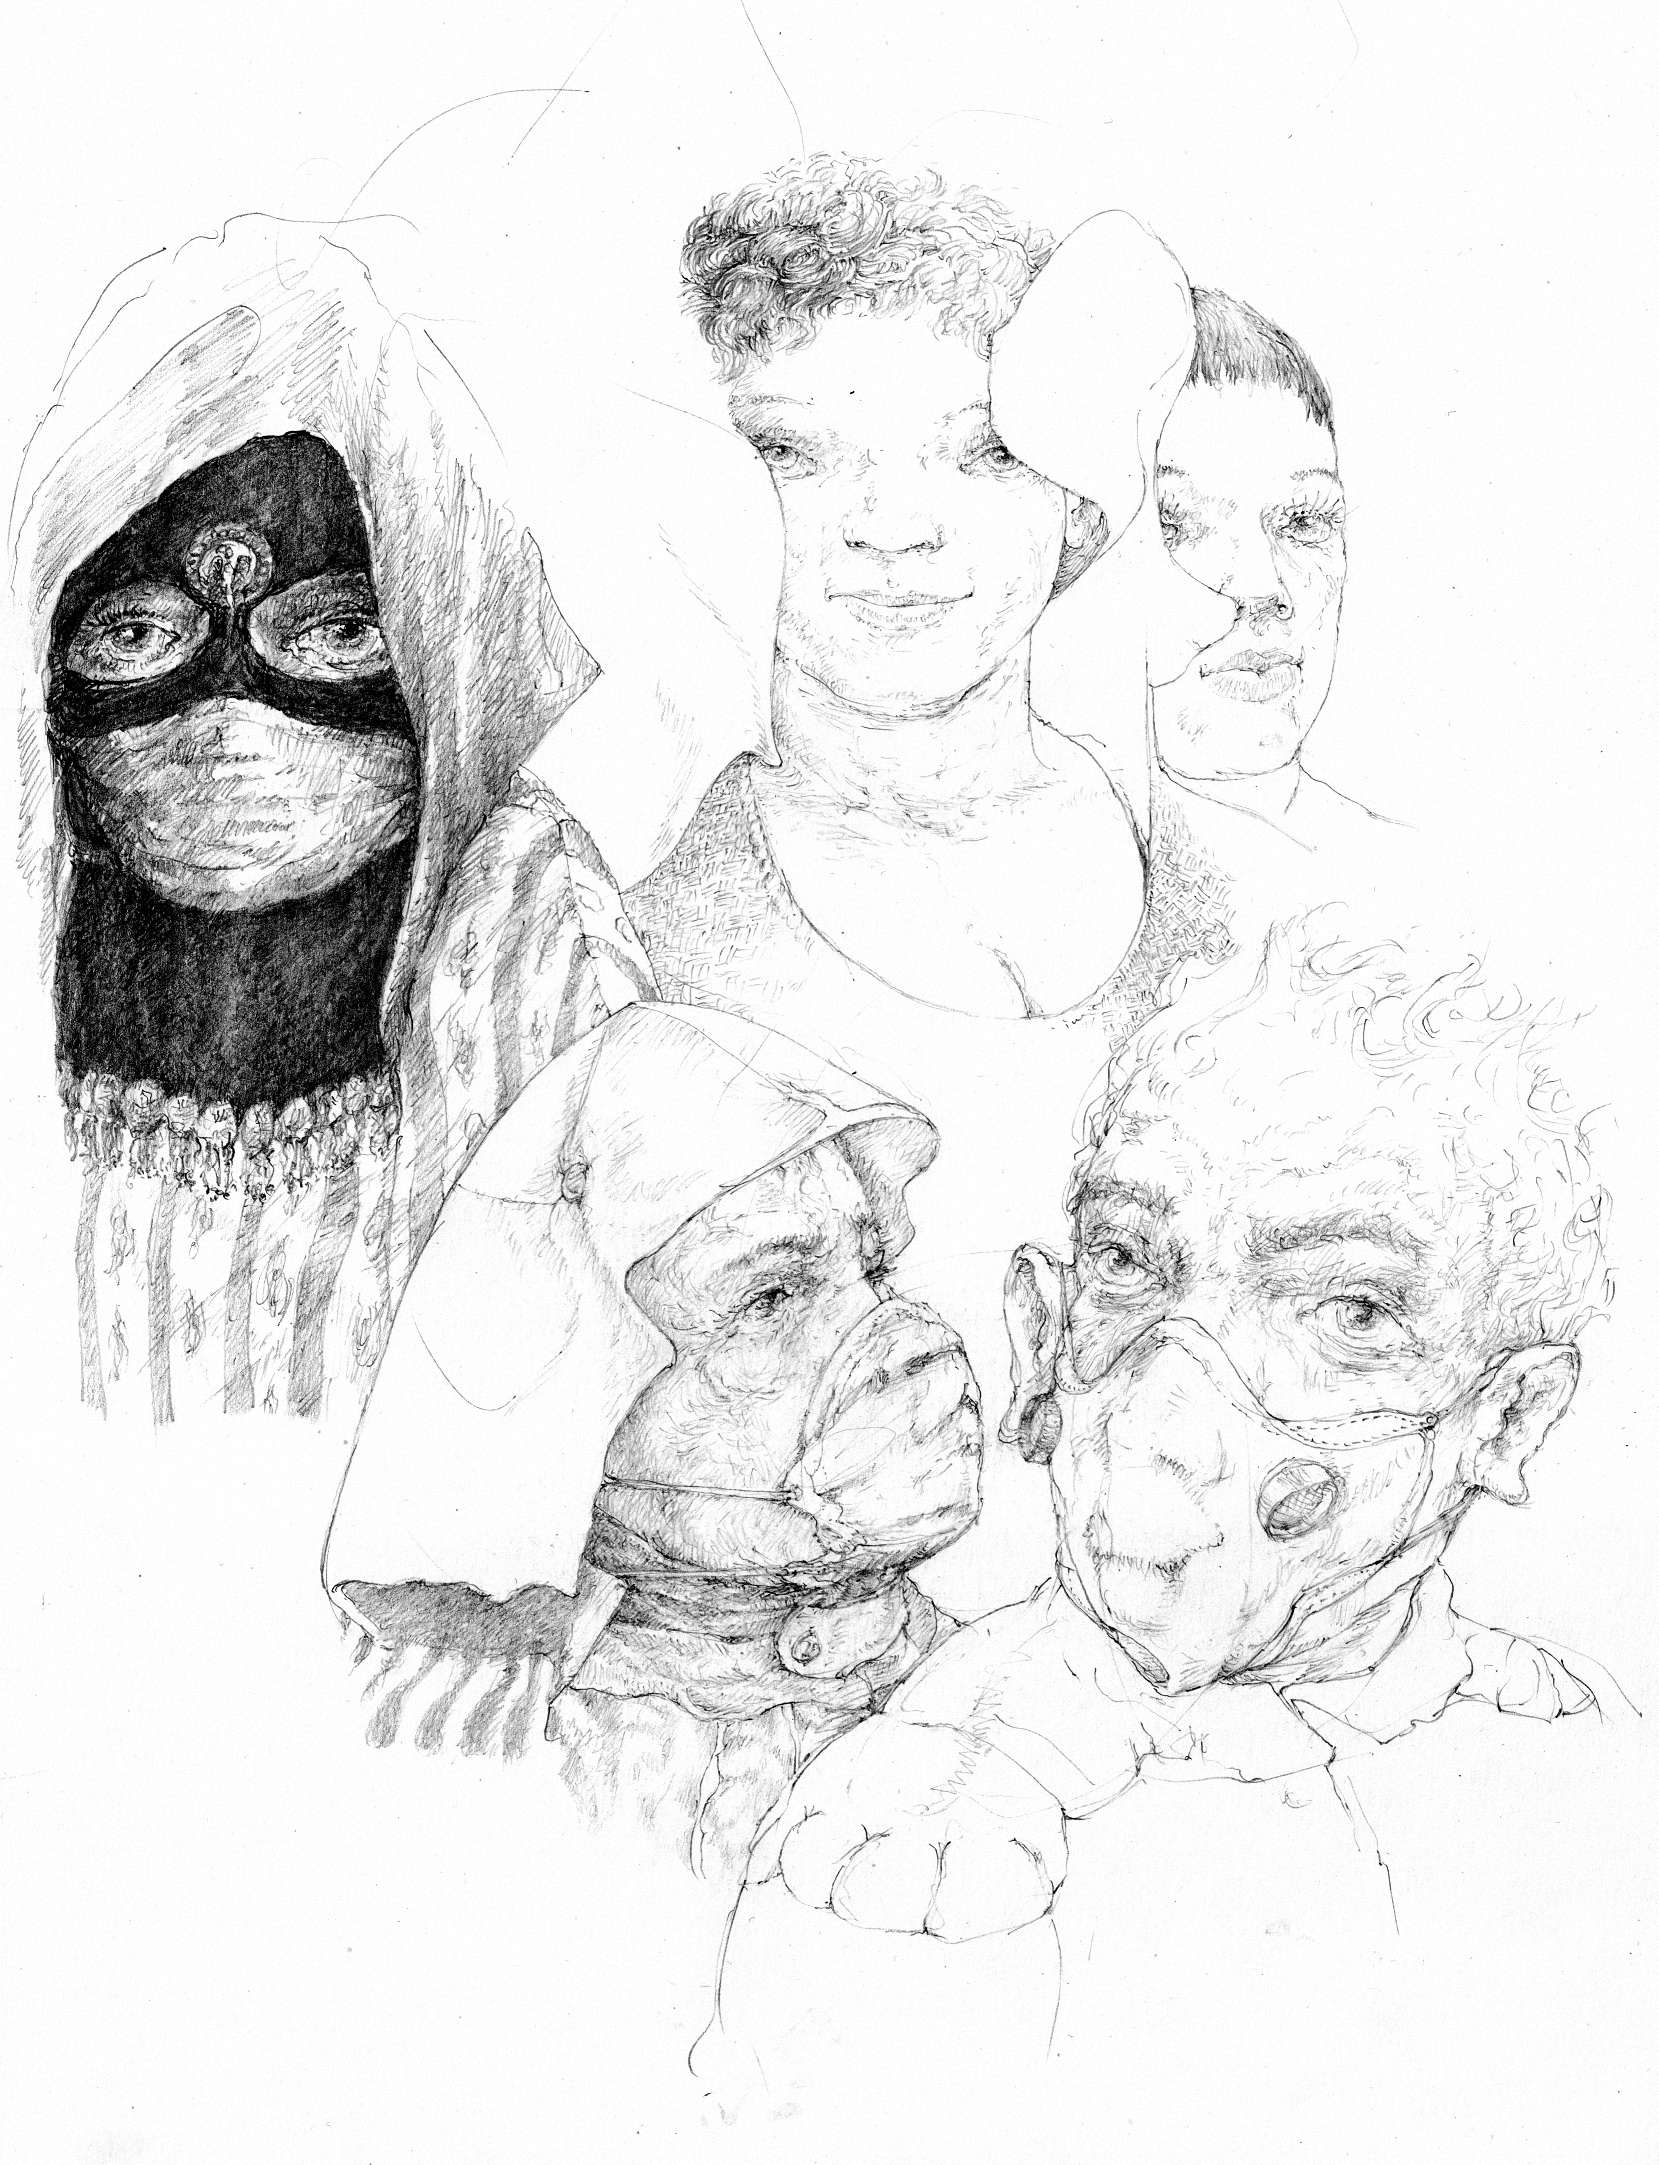 12. Recent drawings series 
<strong>Masks </strong>
Contrasts and similarities.
(2b Pencil drawing, A3. 180grm. Canson “Bristol”)